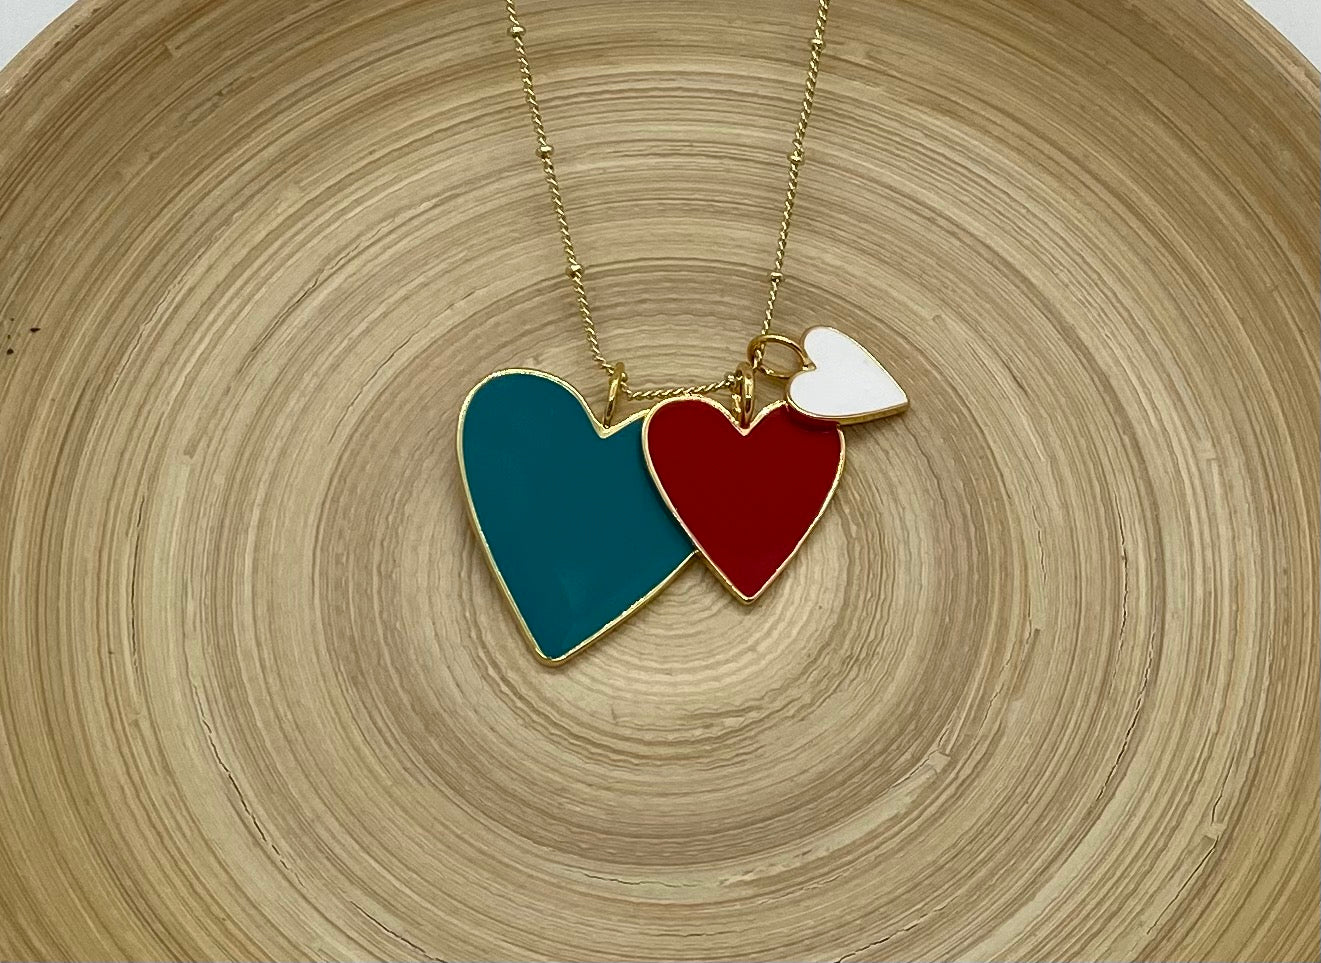 Heart Trio Necklace - Teal Red and White